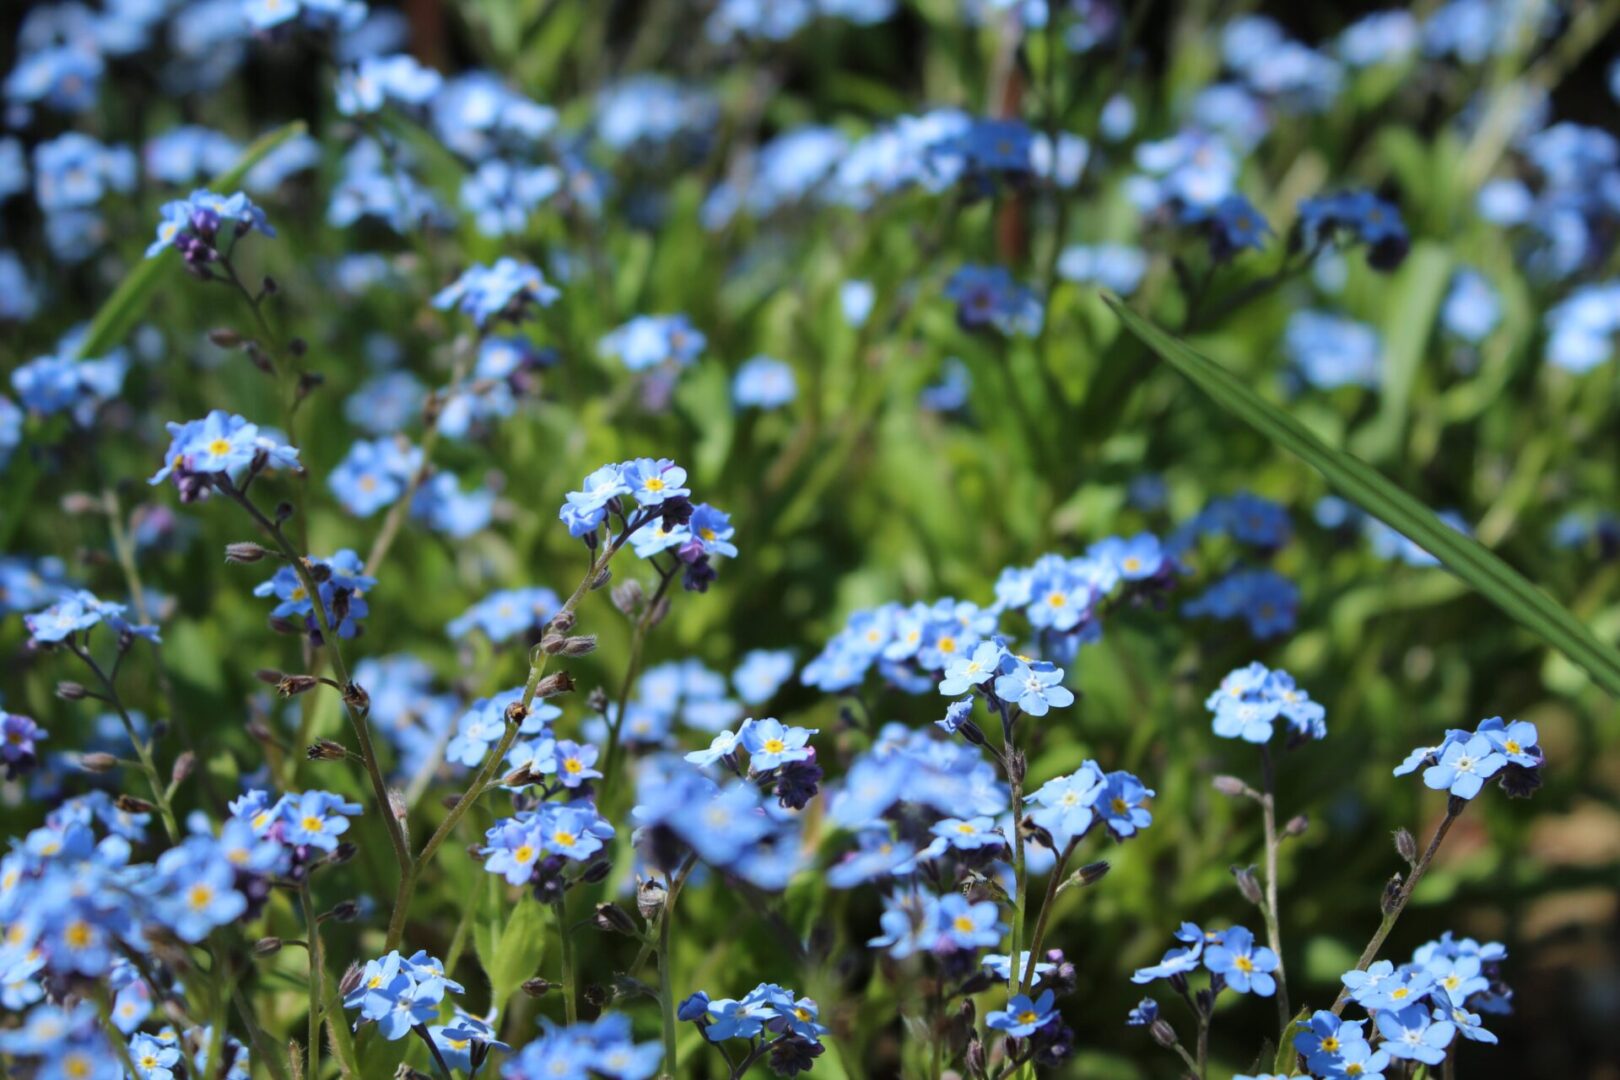 A field of blue flowers in the grass.